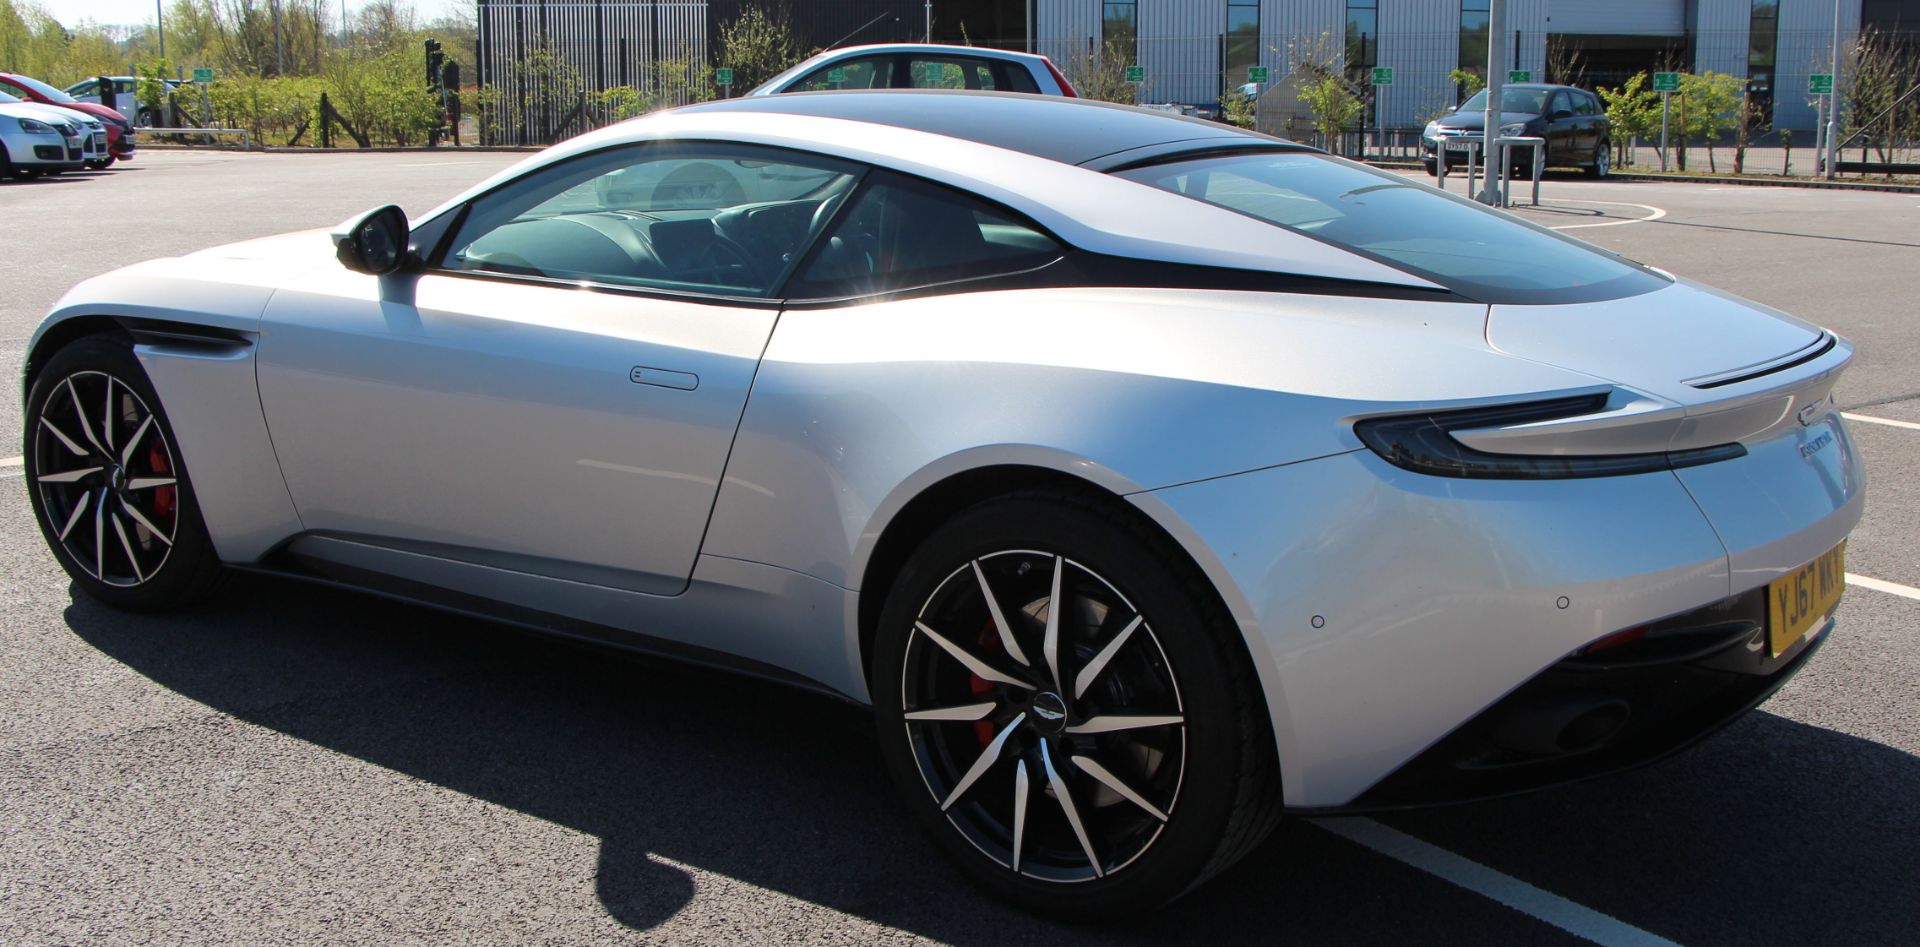 ASTON MARTIN DB11 V8 AUTOMATIC (3982cc) COUPE - 8 speed automatic - petrol - silver - dark - Image 36 of 68